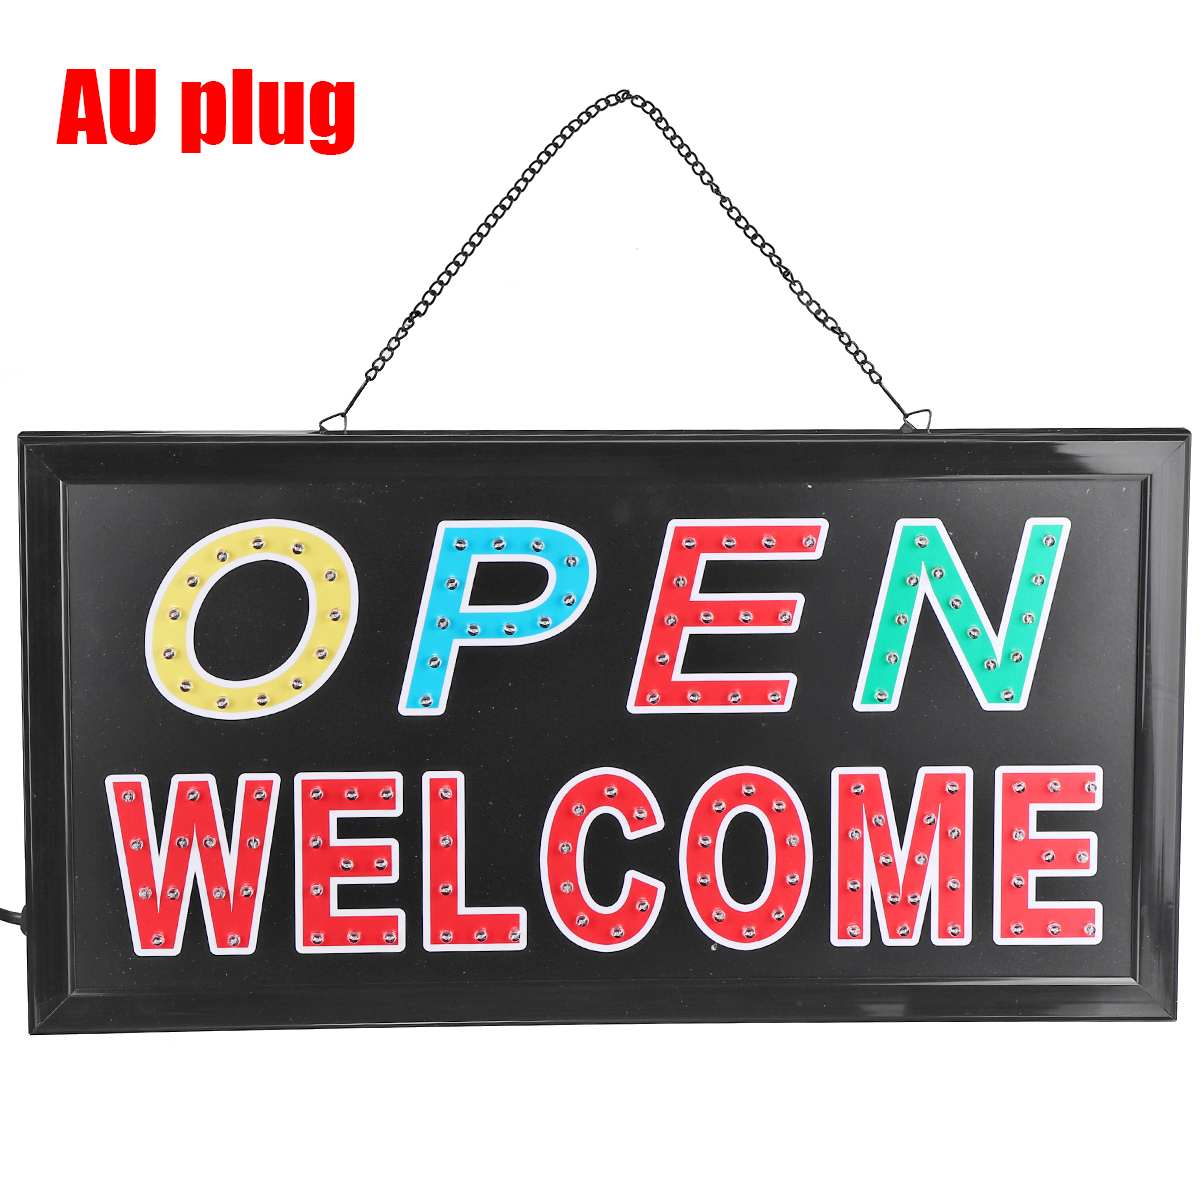 LED Store Open Sign Advertising Light Board Shopping Mall Bright Animated Motion Neon Business Store Billboard US AU Plug: 220V